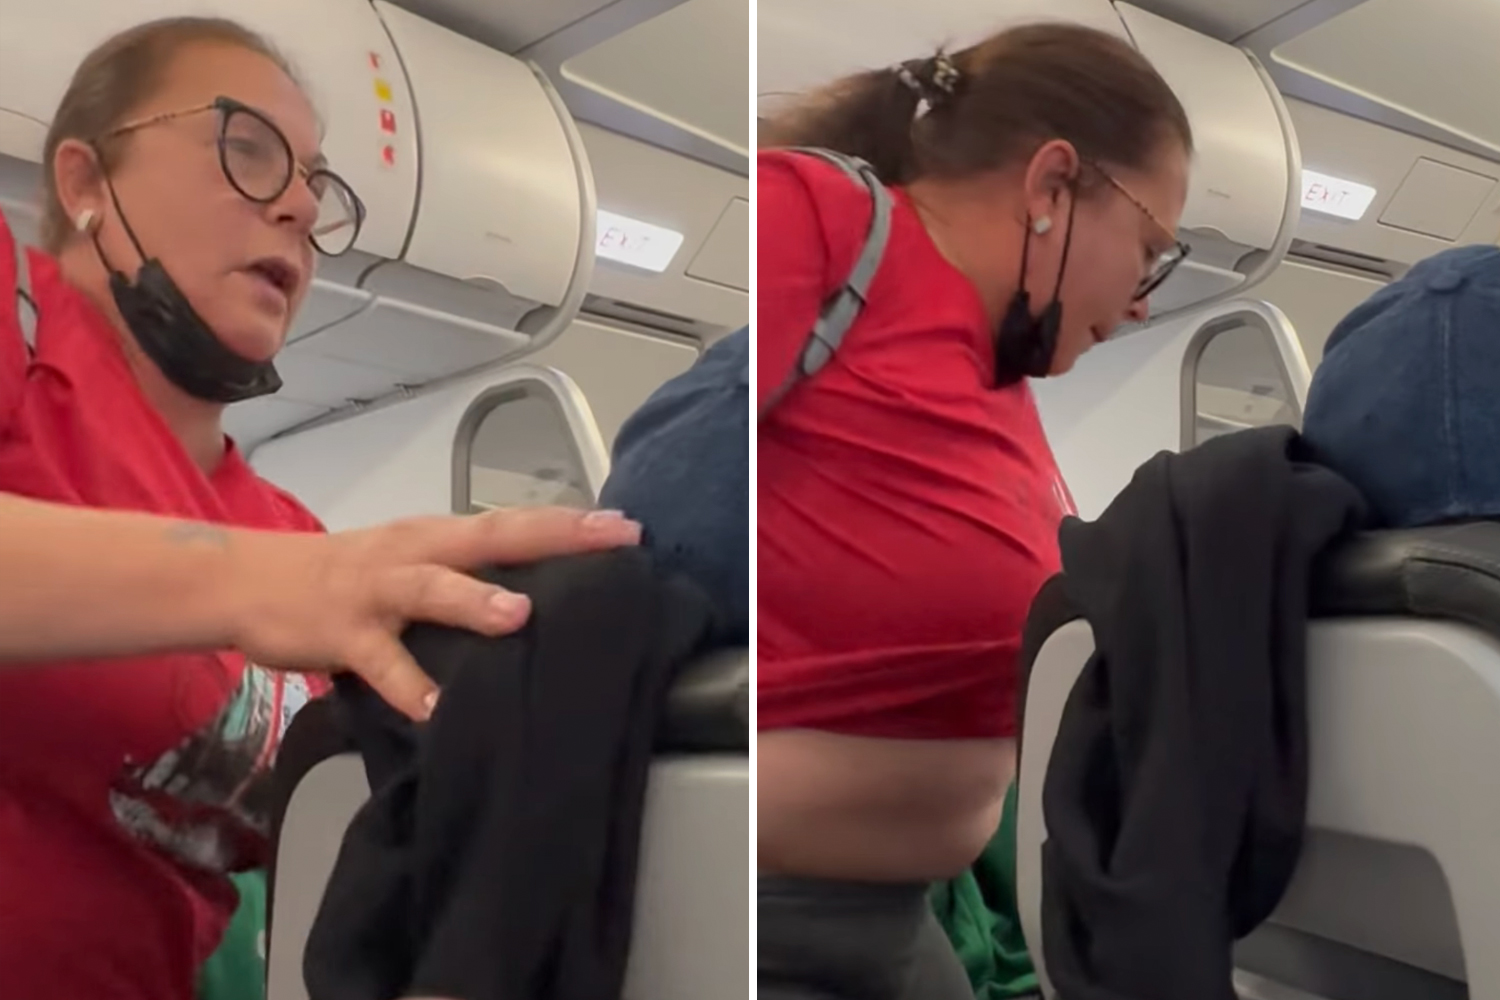 Passenger Threatens To Pee In Airplane Aisle, Pulls Down Pants And Squats